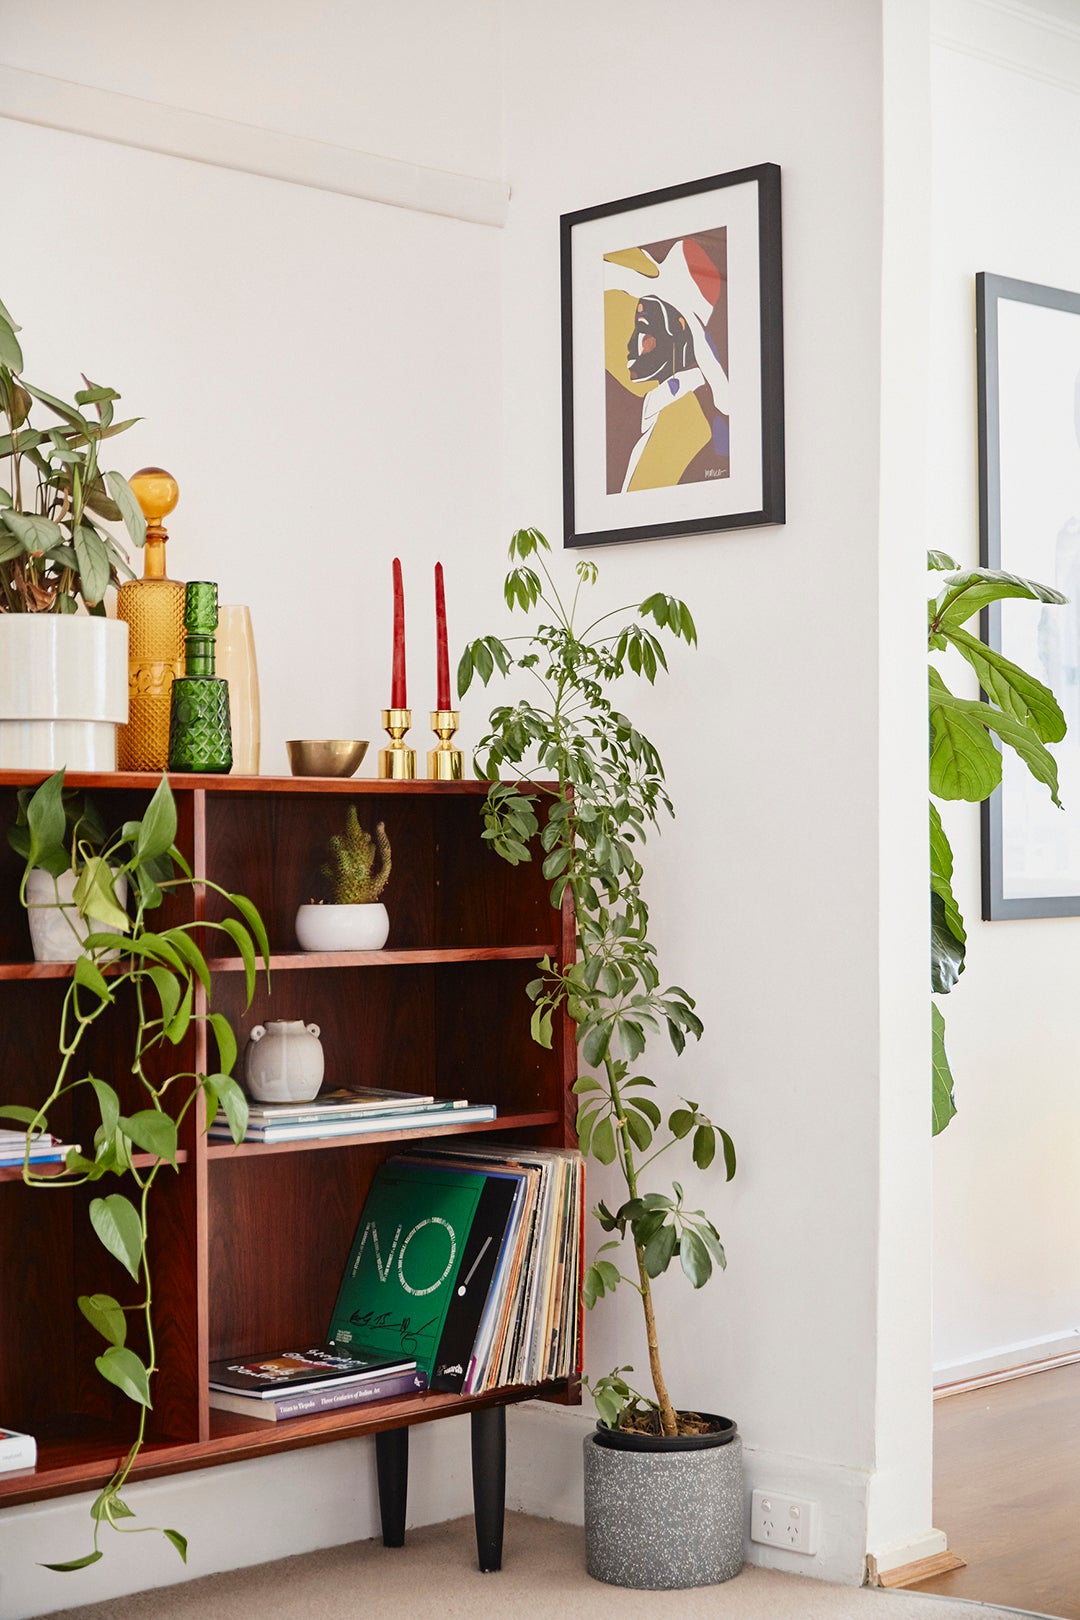 Home corner, plants, paintings and wooden shelves